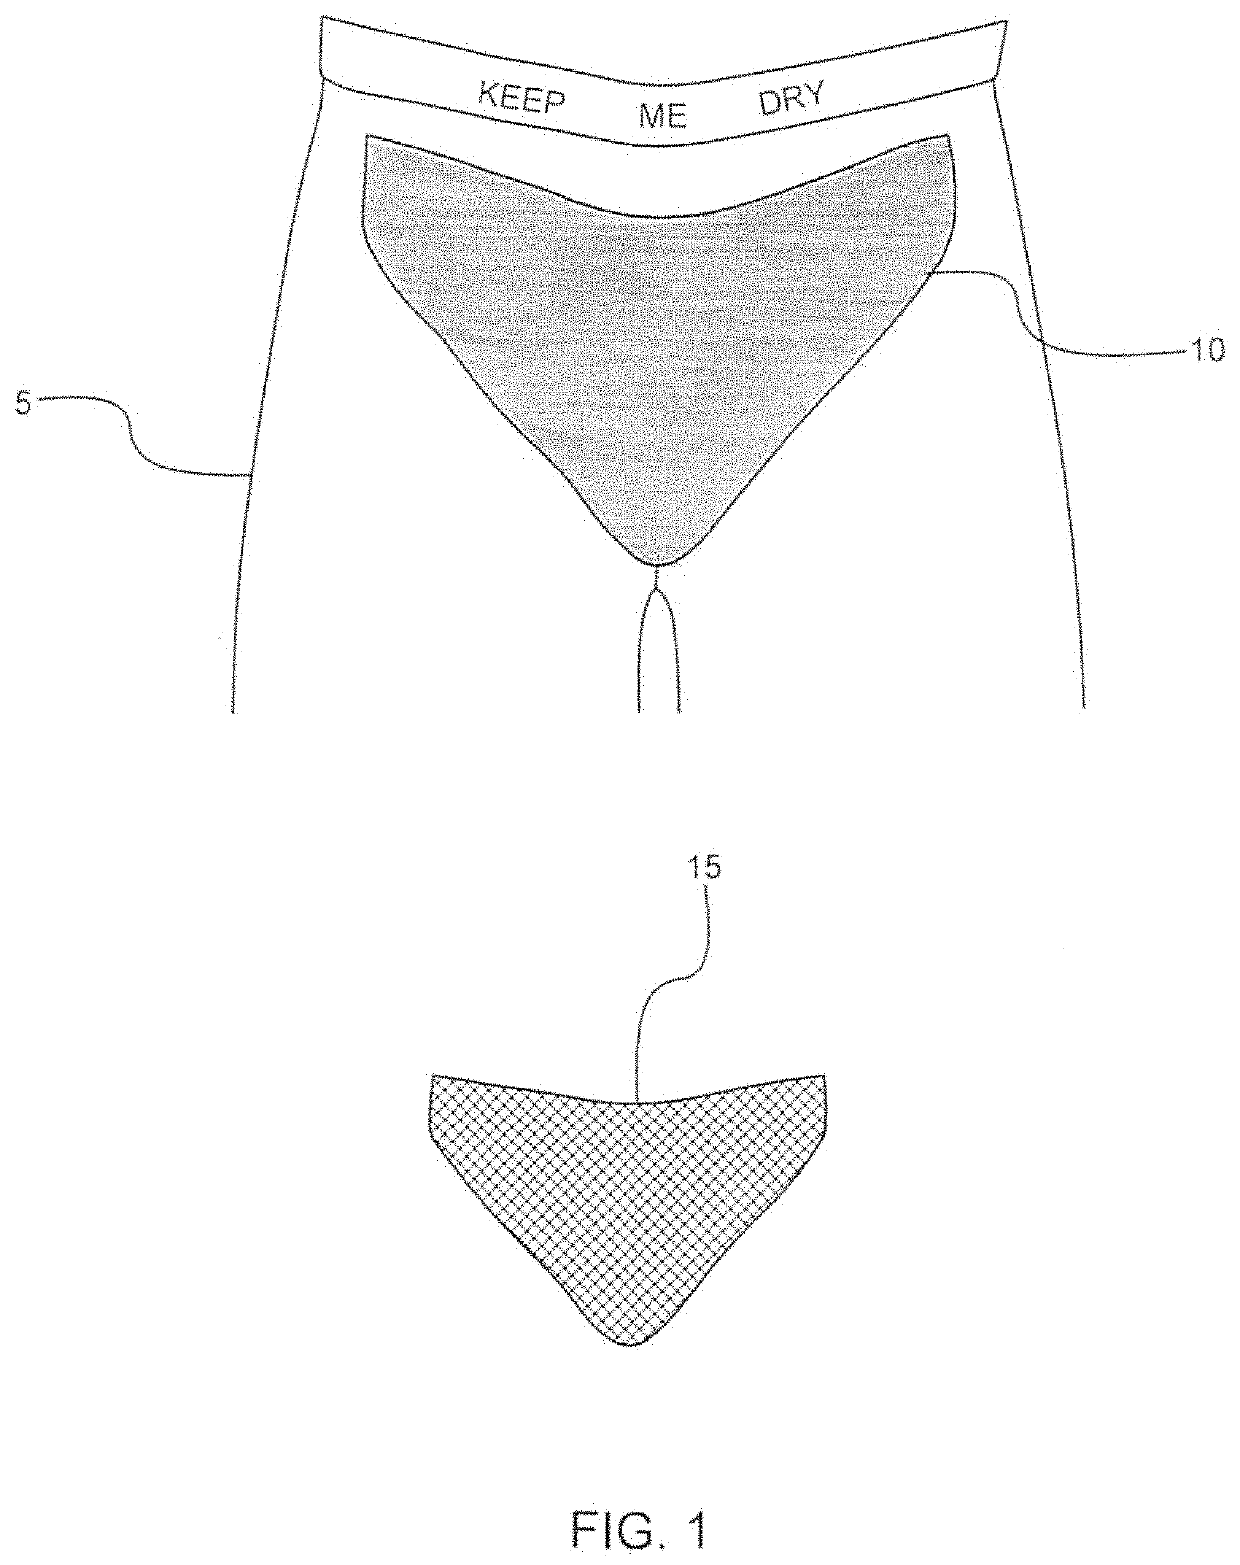 Undergarment with a Waterproof Pocket and an Absorbent Insert